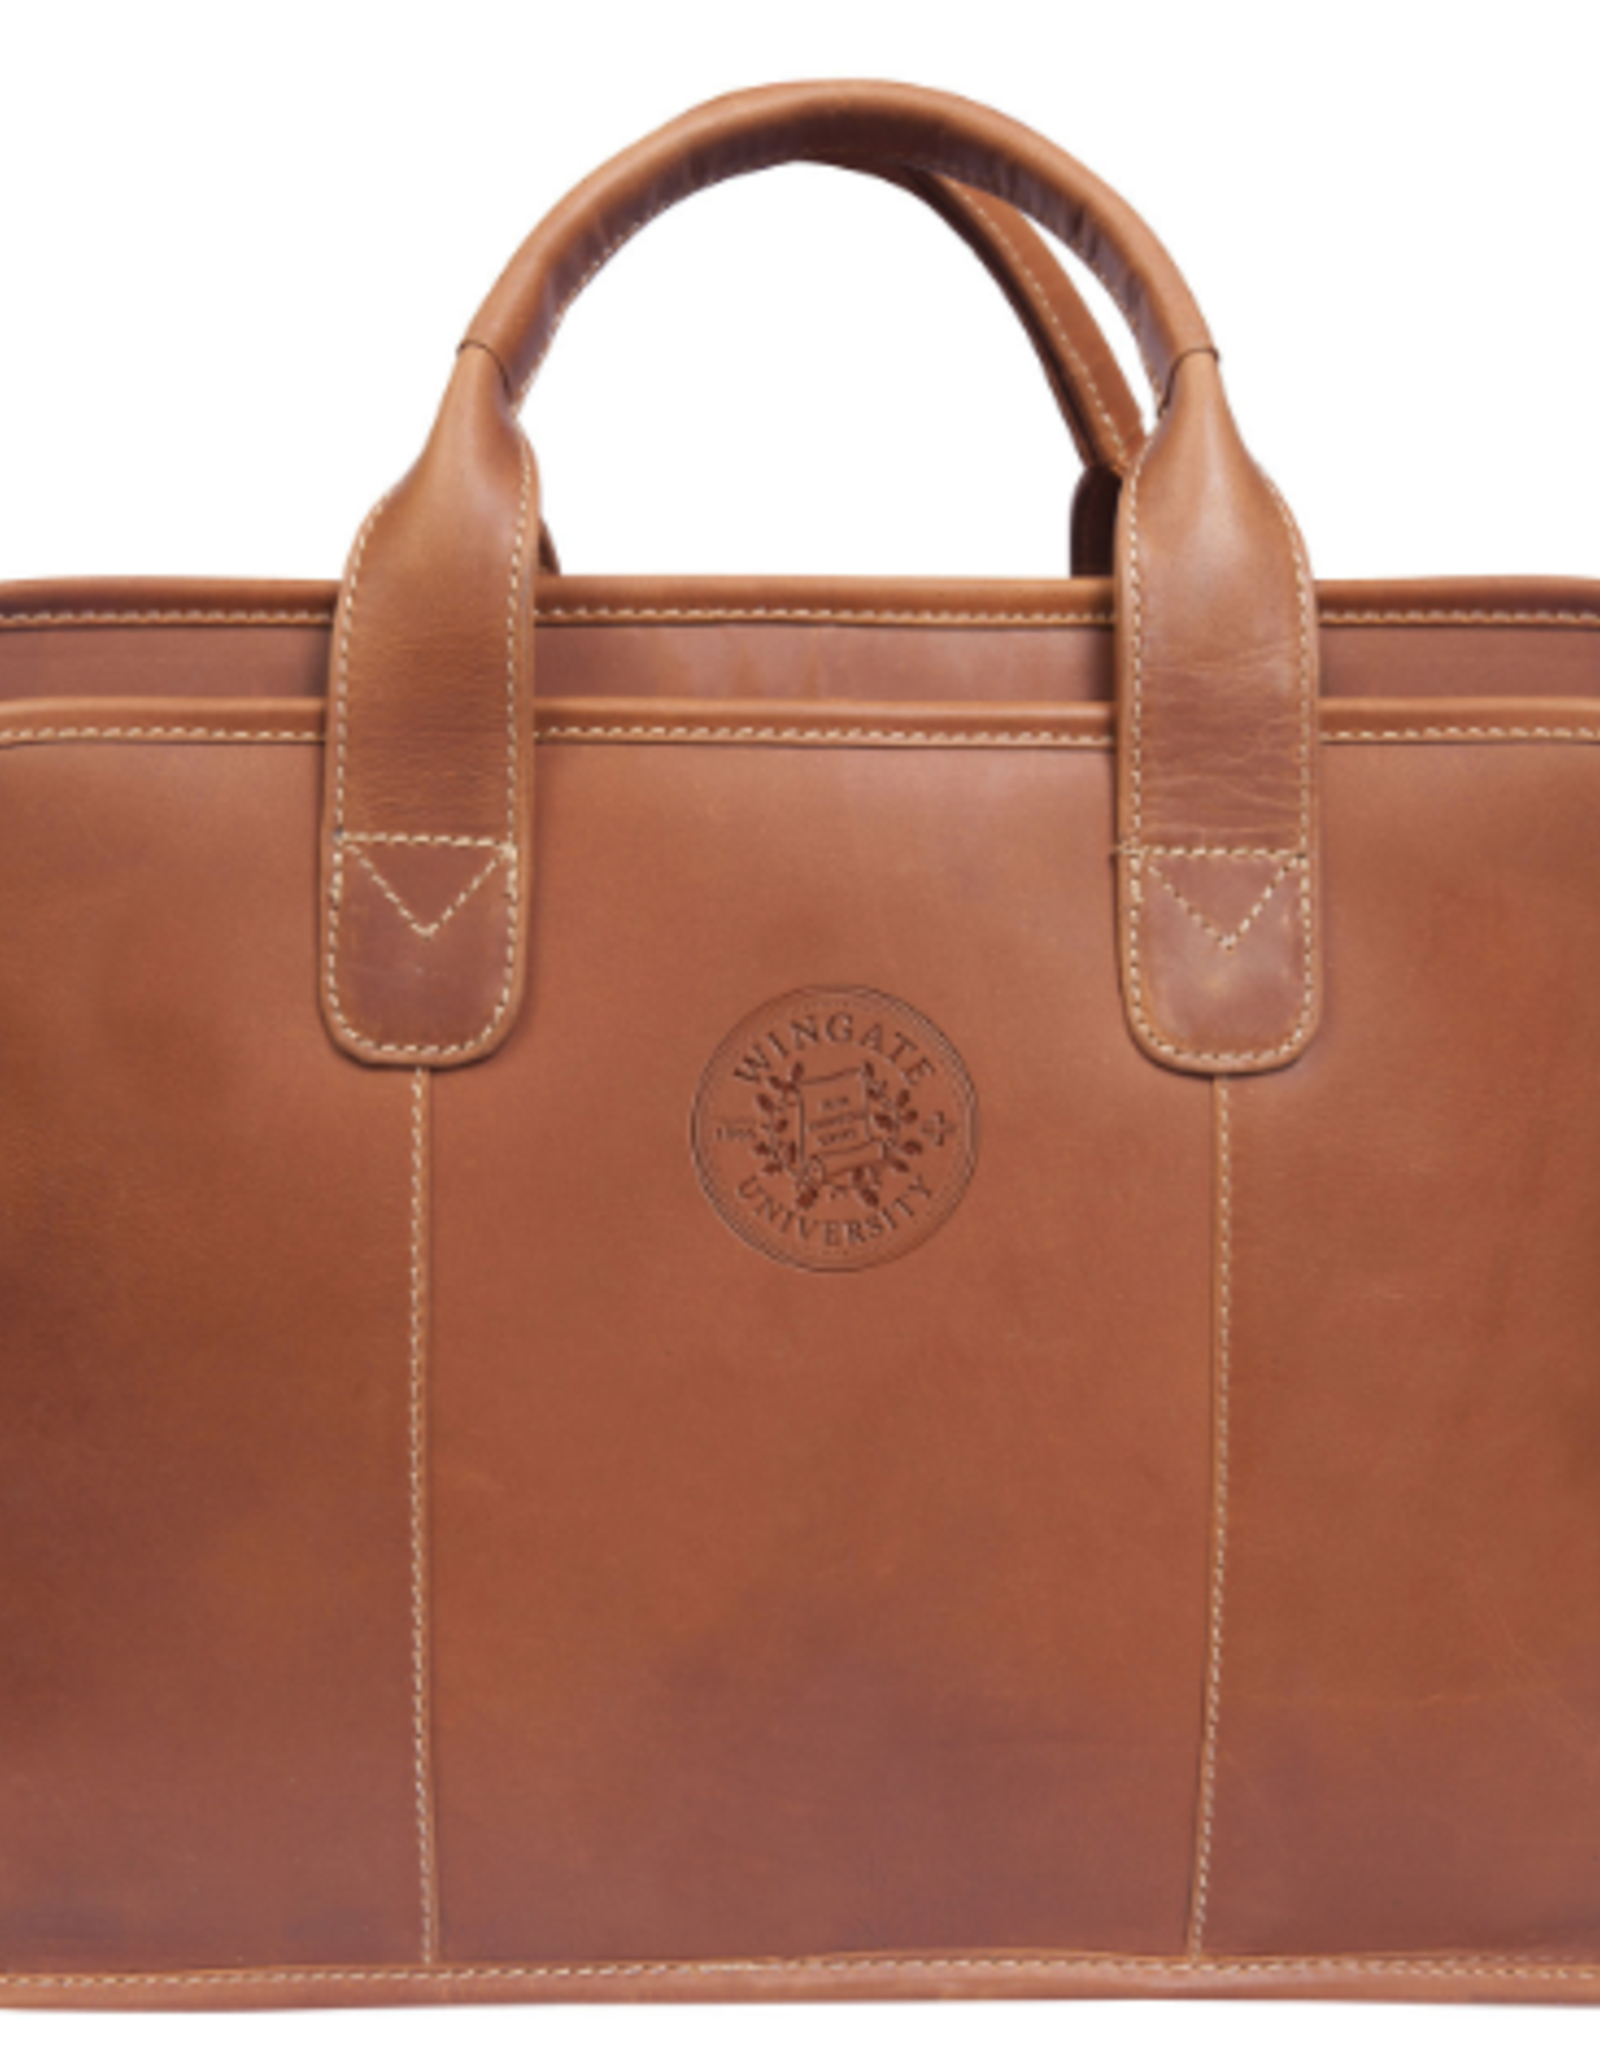 DROP SHIP ONLY Buffalo Valley Briefcase CS223 (ONLINE ONLY)